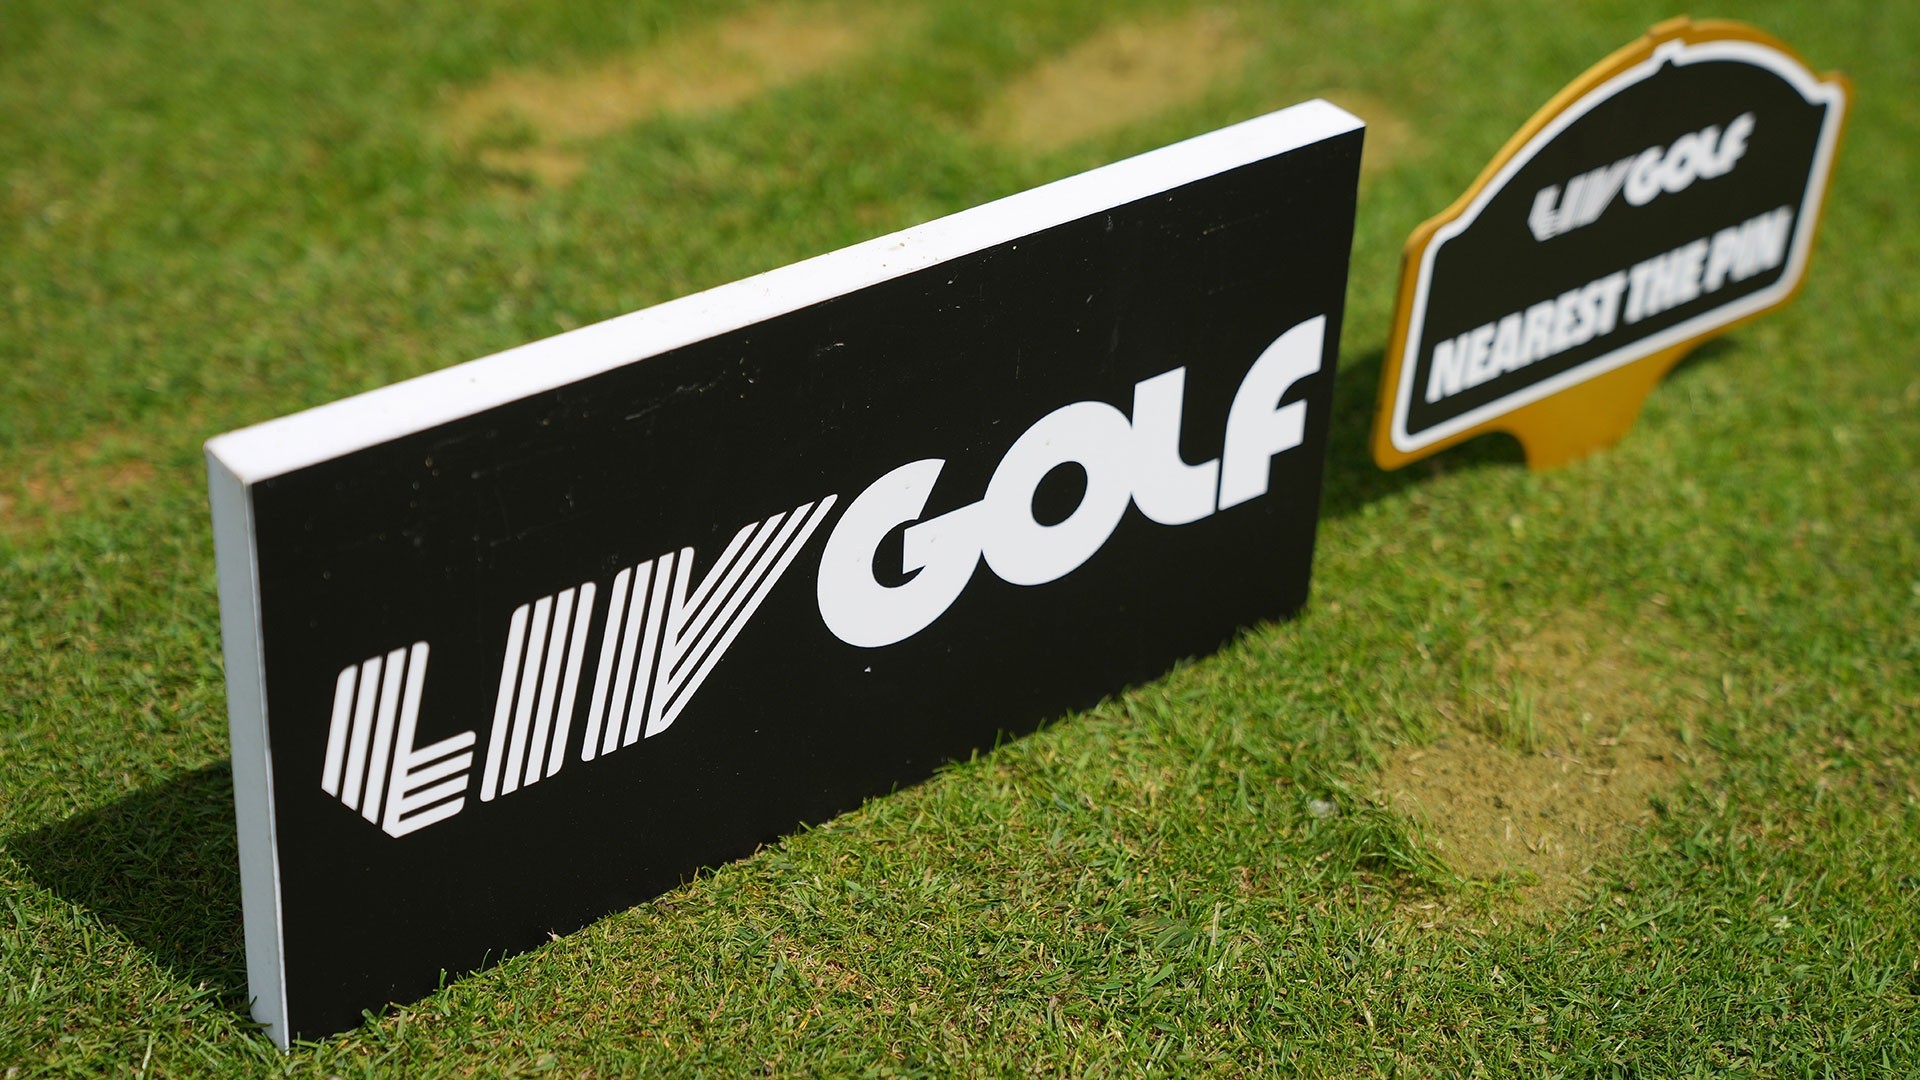 Cam Smith, five PGA members join LIV Golf